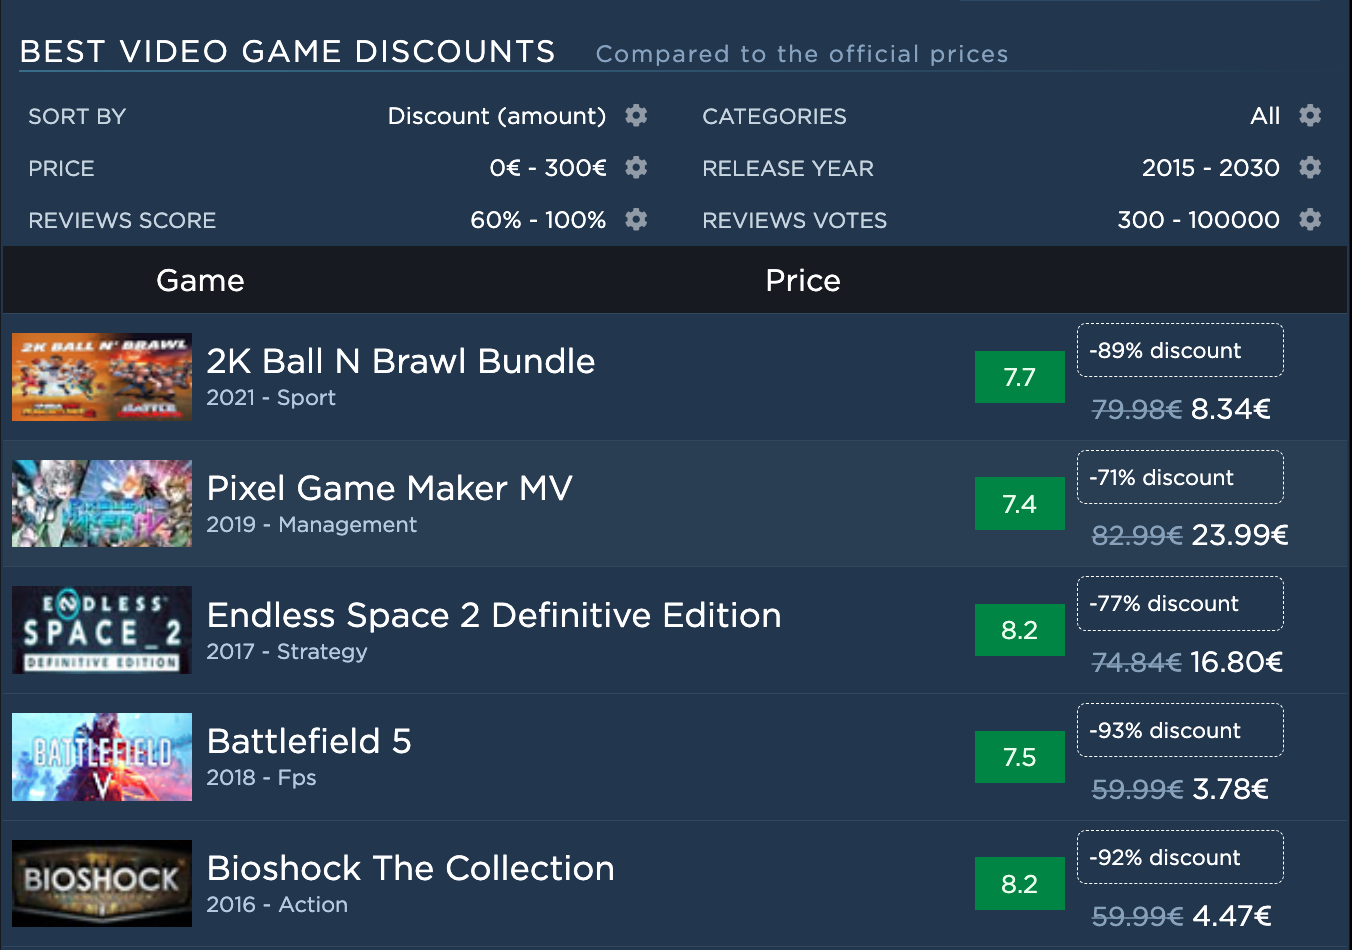 DailyGameDeals - Why? For the Deals!